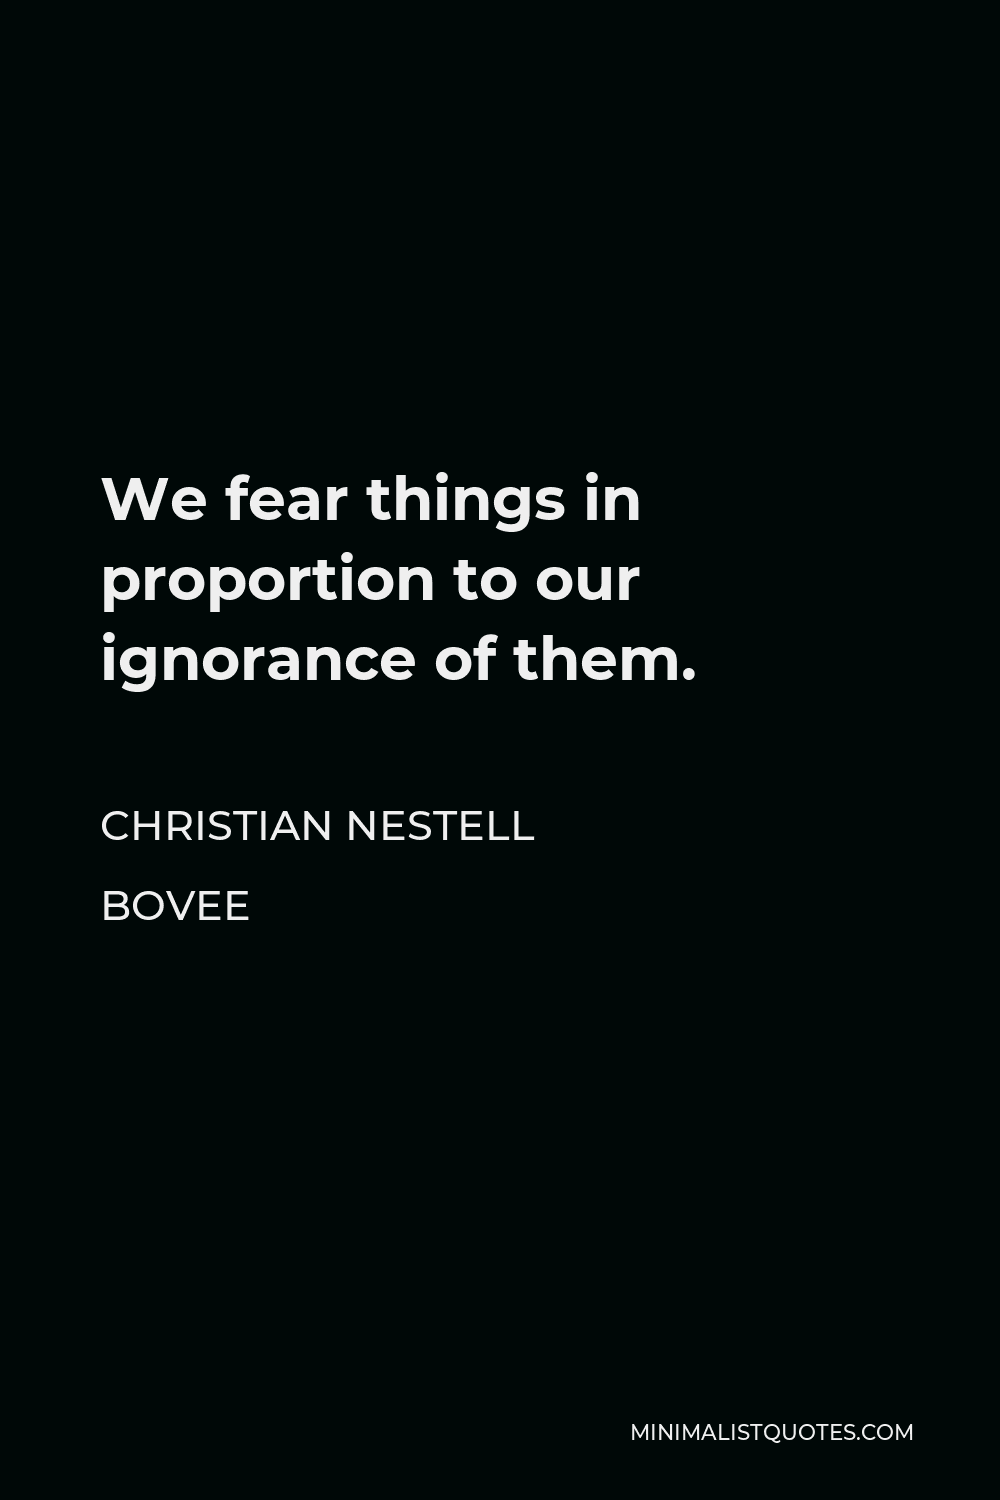 Christian Nestell Bovee Quote - We fear things in proportion to our ignorance of them.